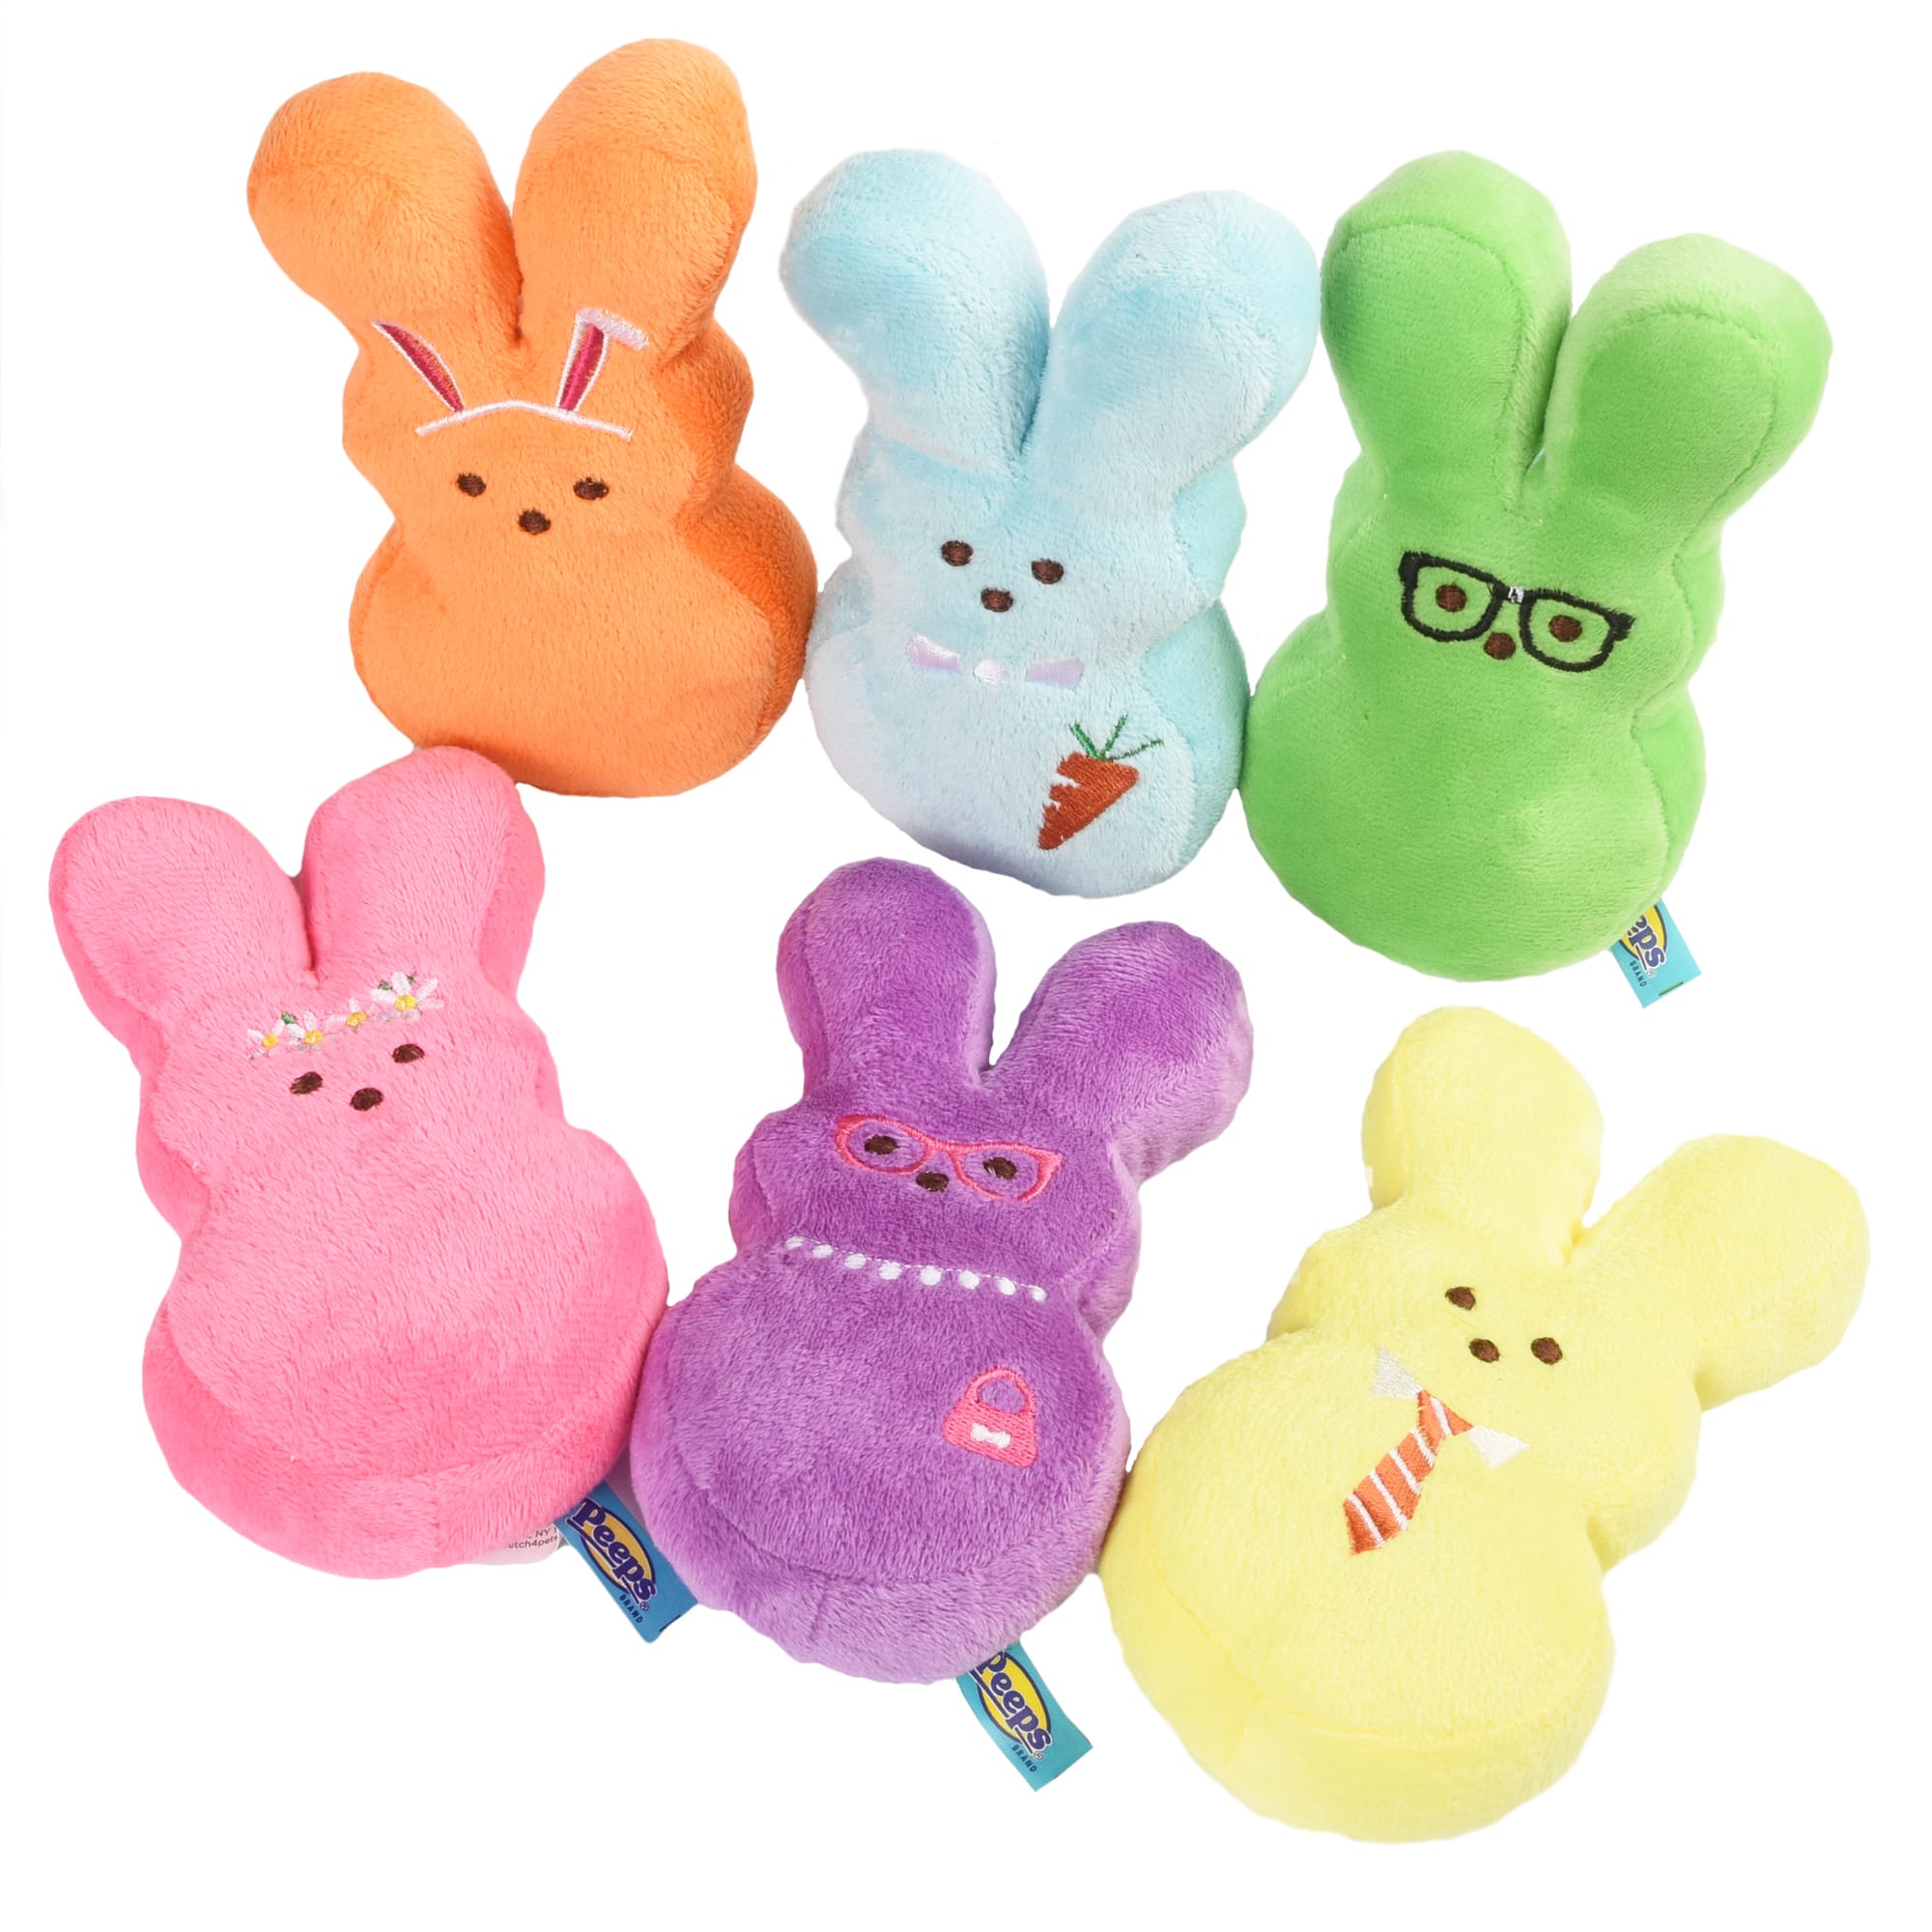 Peeps for Pets Dress-Up Bunnies Plush Dog Toy in Assorted Colors, Small